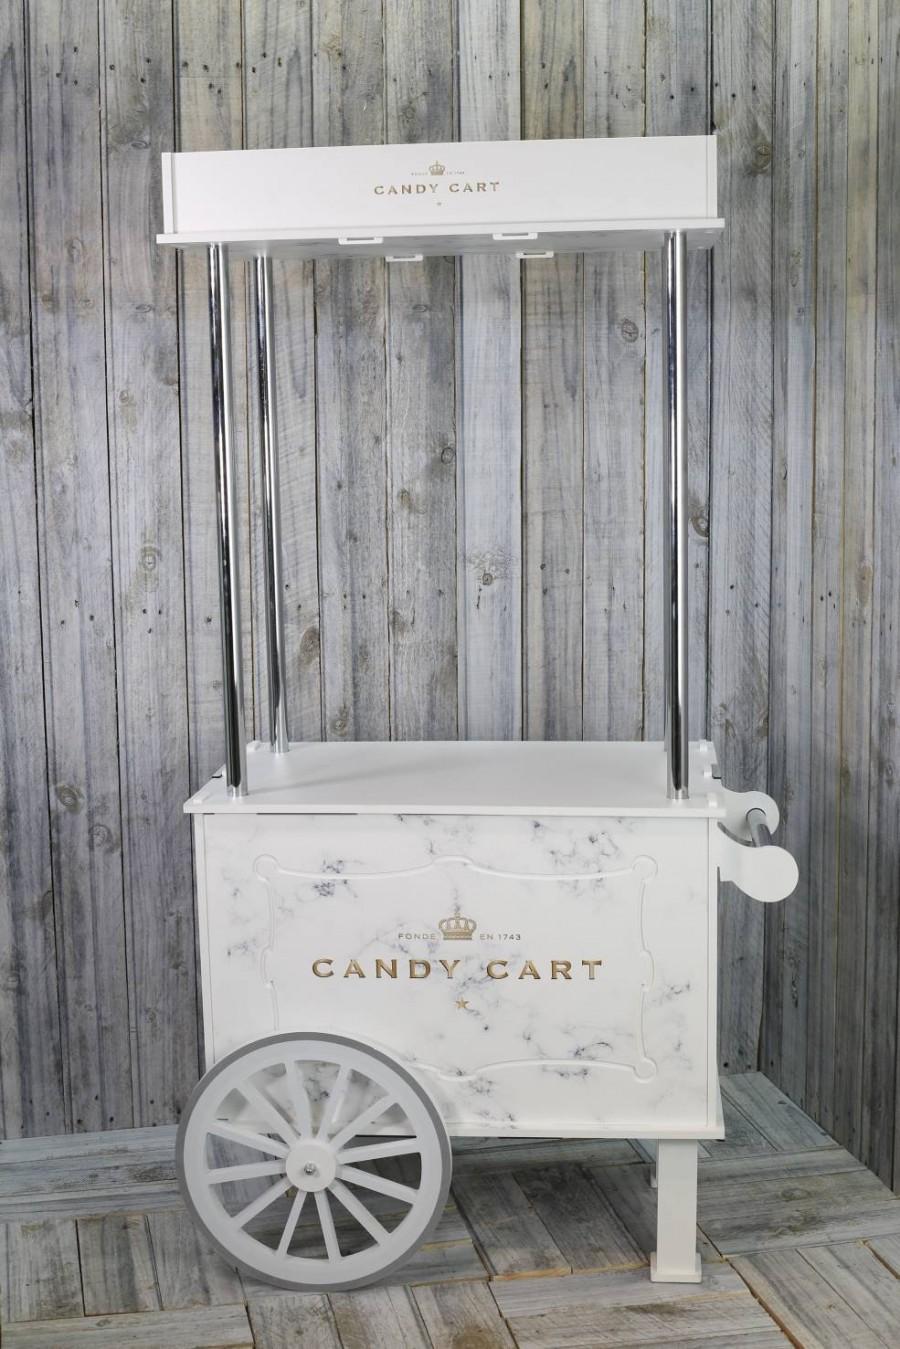 Wedding - Candy Cart various sizes, from 2.2m Tall (7ft) to 105cm desktop. Made From 10mm Plastic, Fully Printed. Freestanding